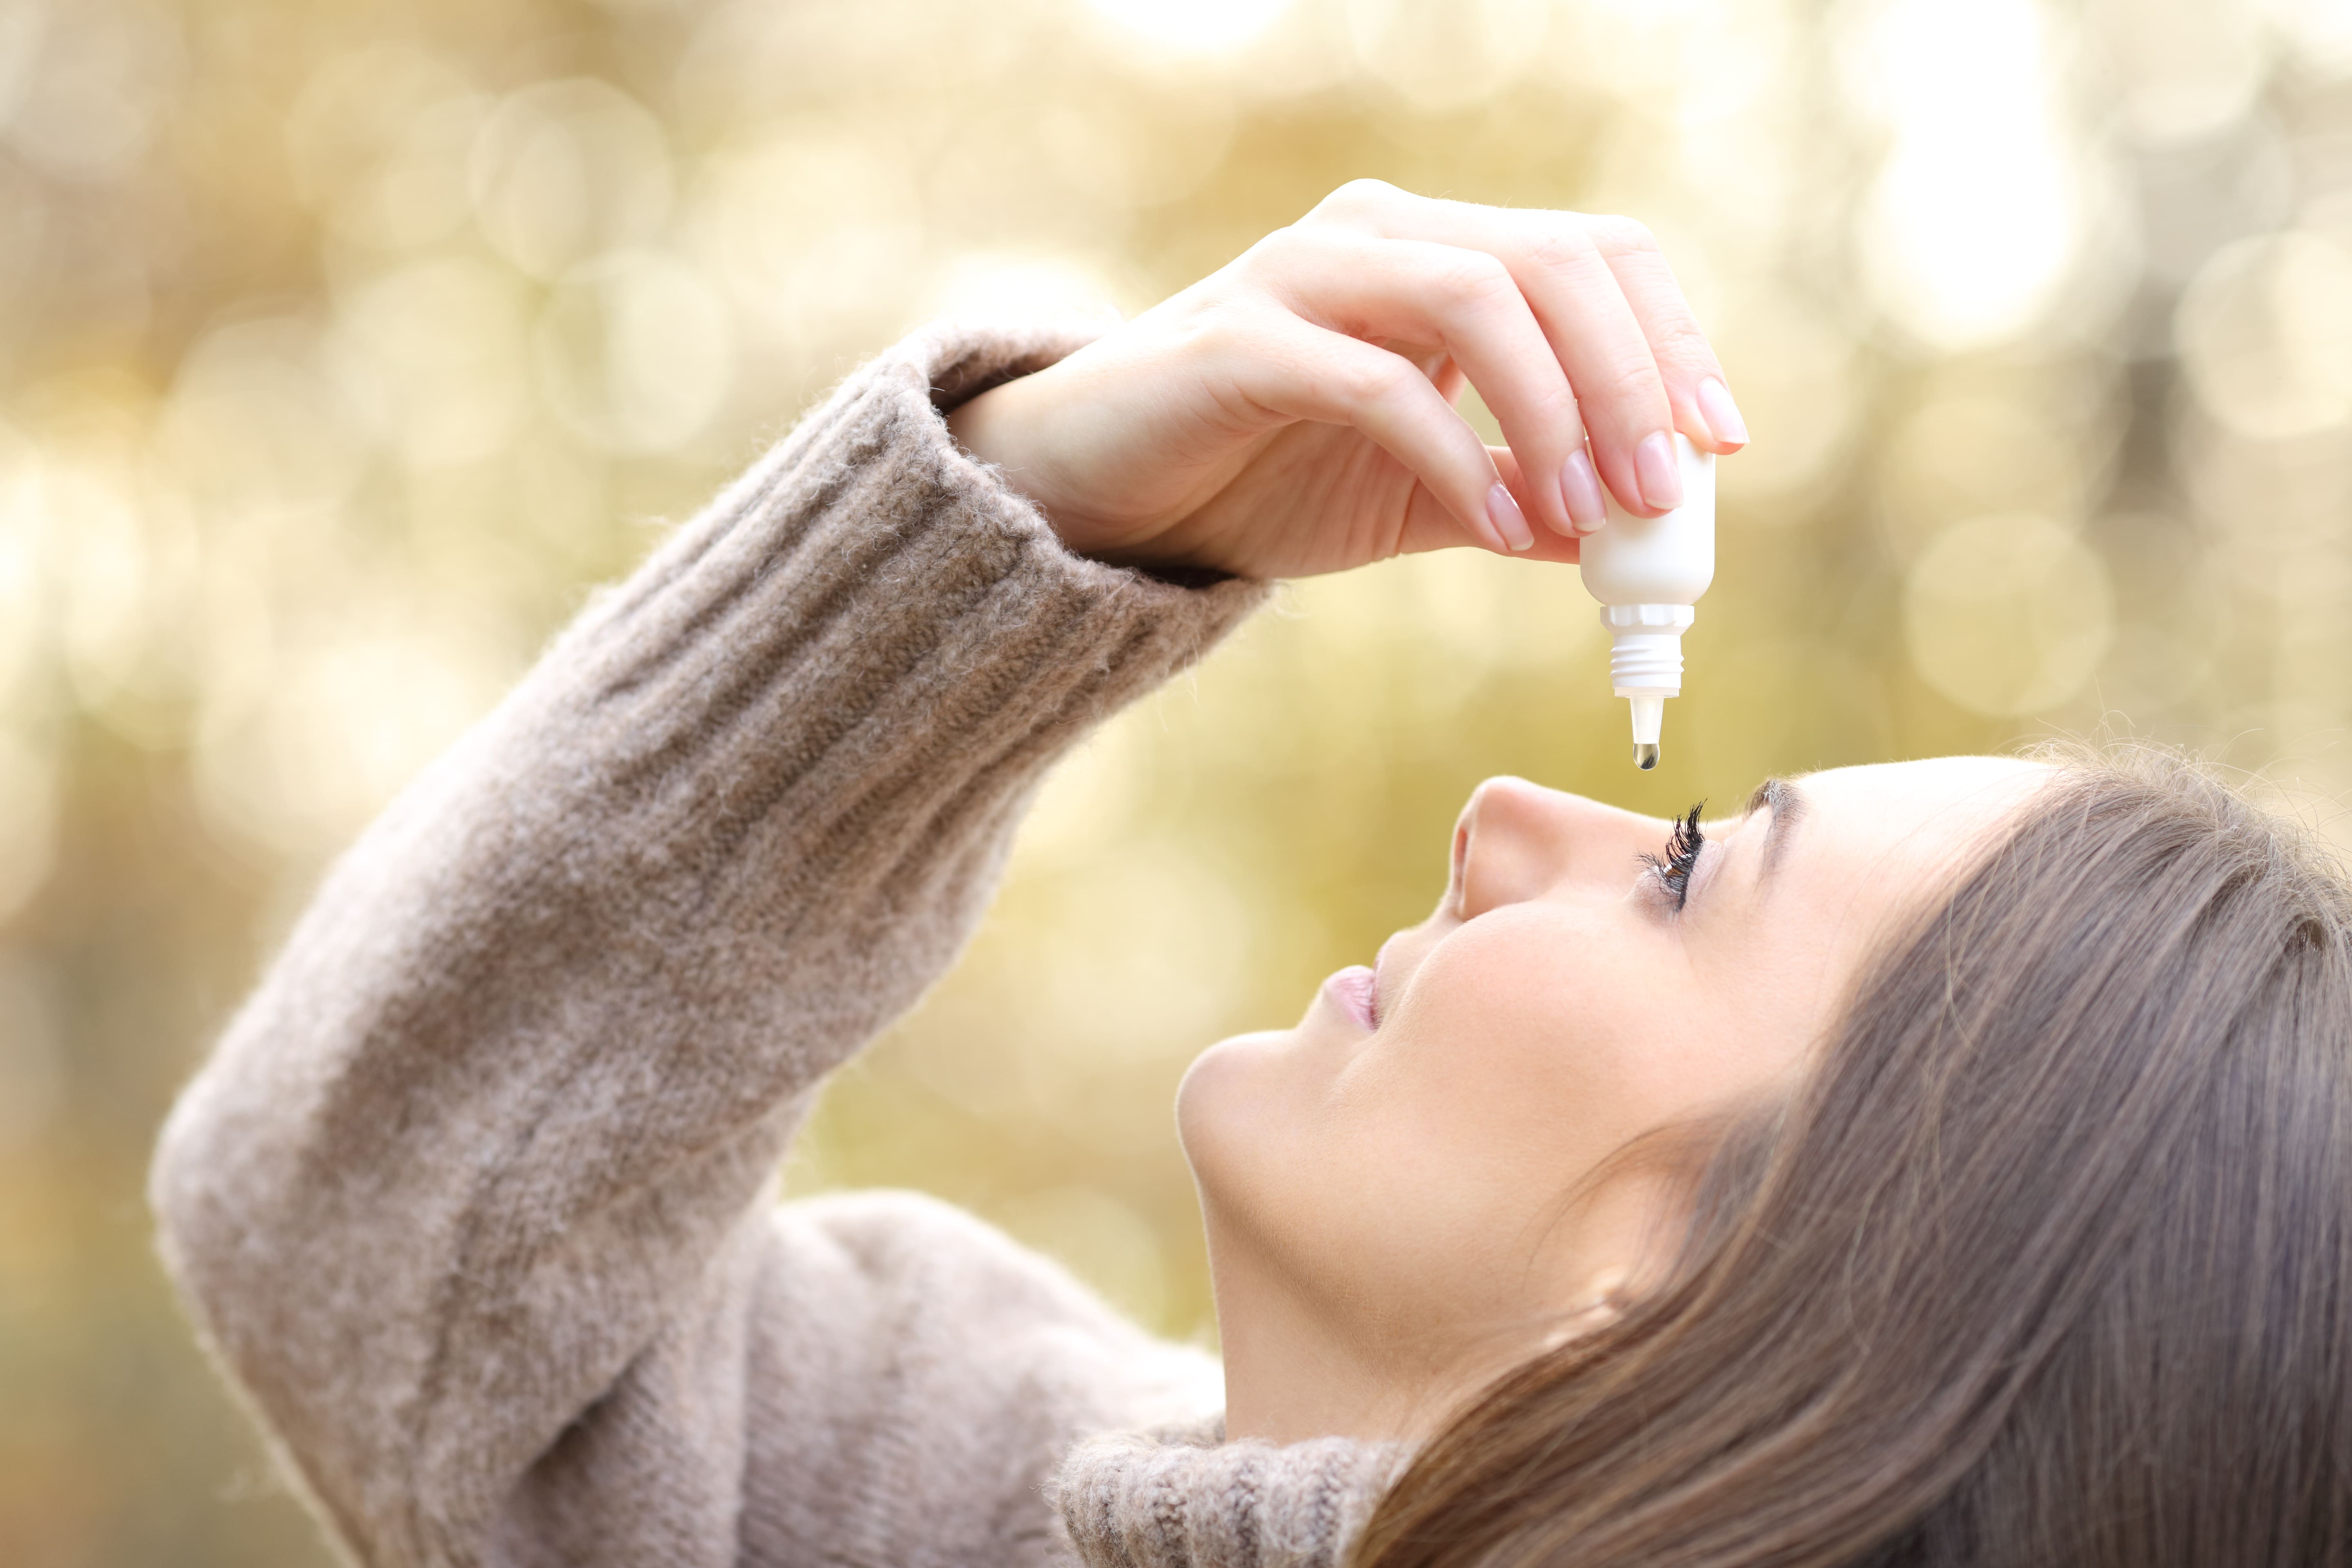 Soothe, Hydrate, and Rejuvenate: Conquering Dry Eye Symptoms for Relief